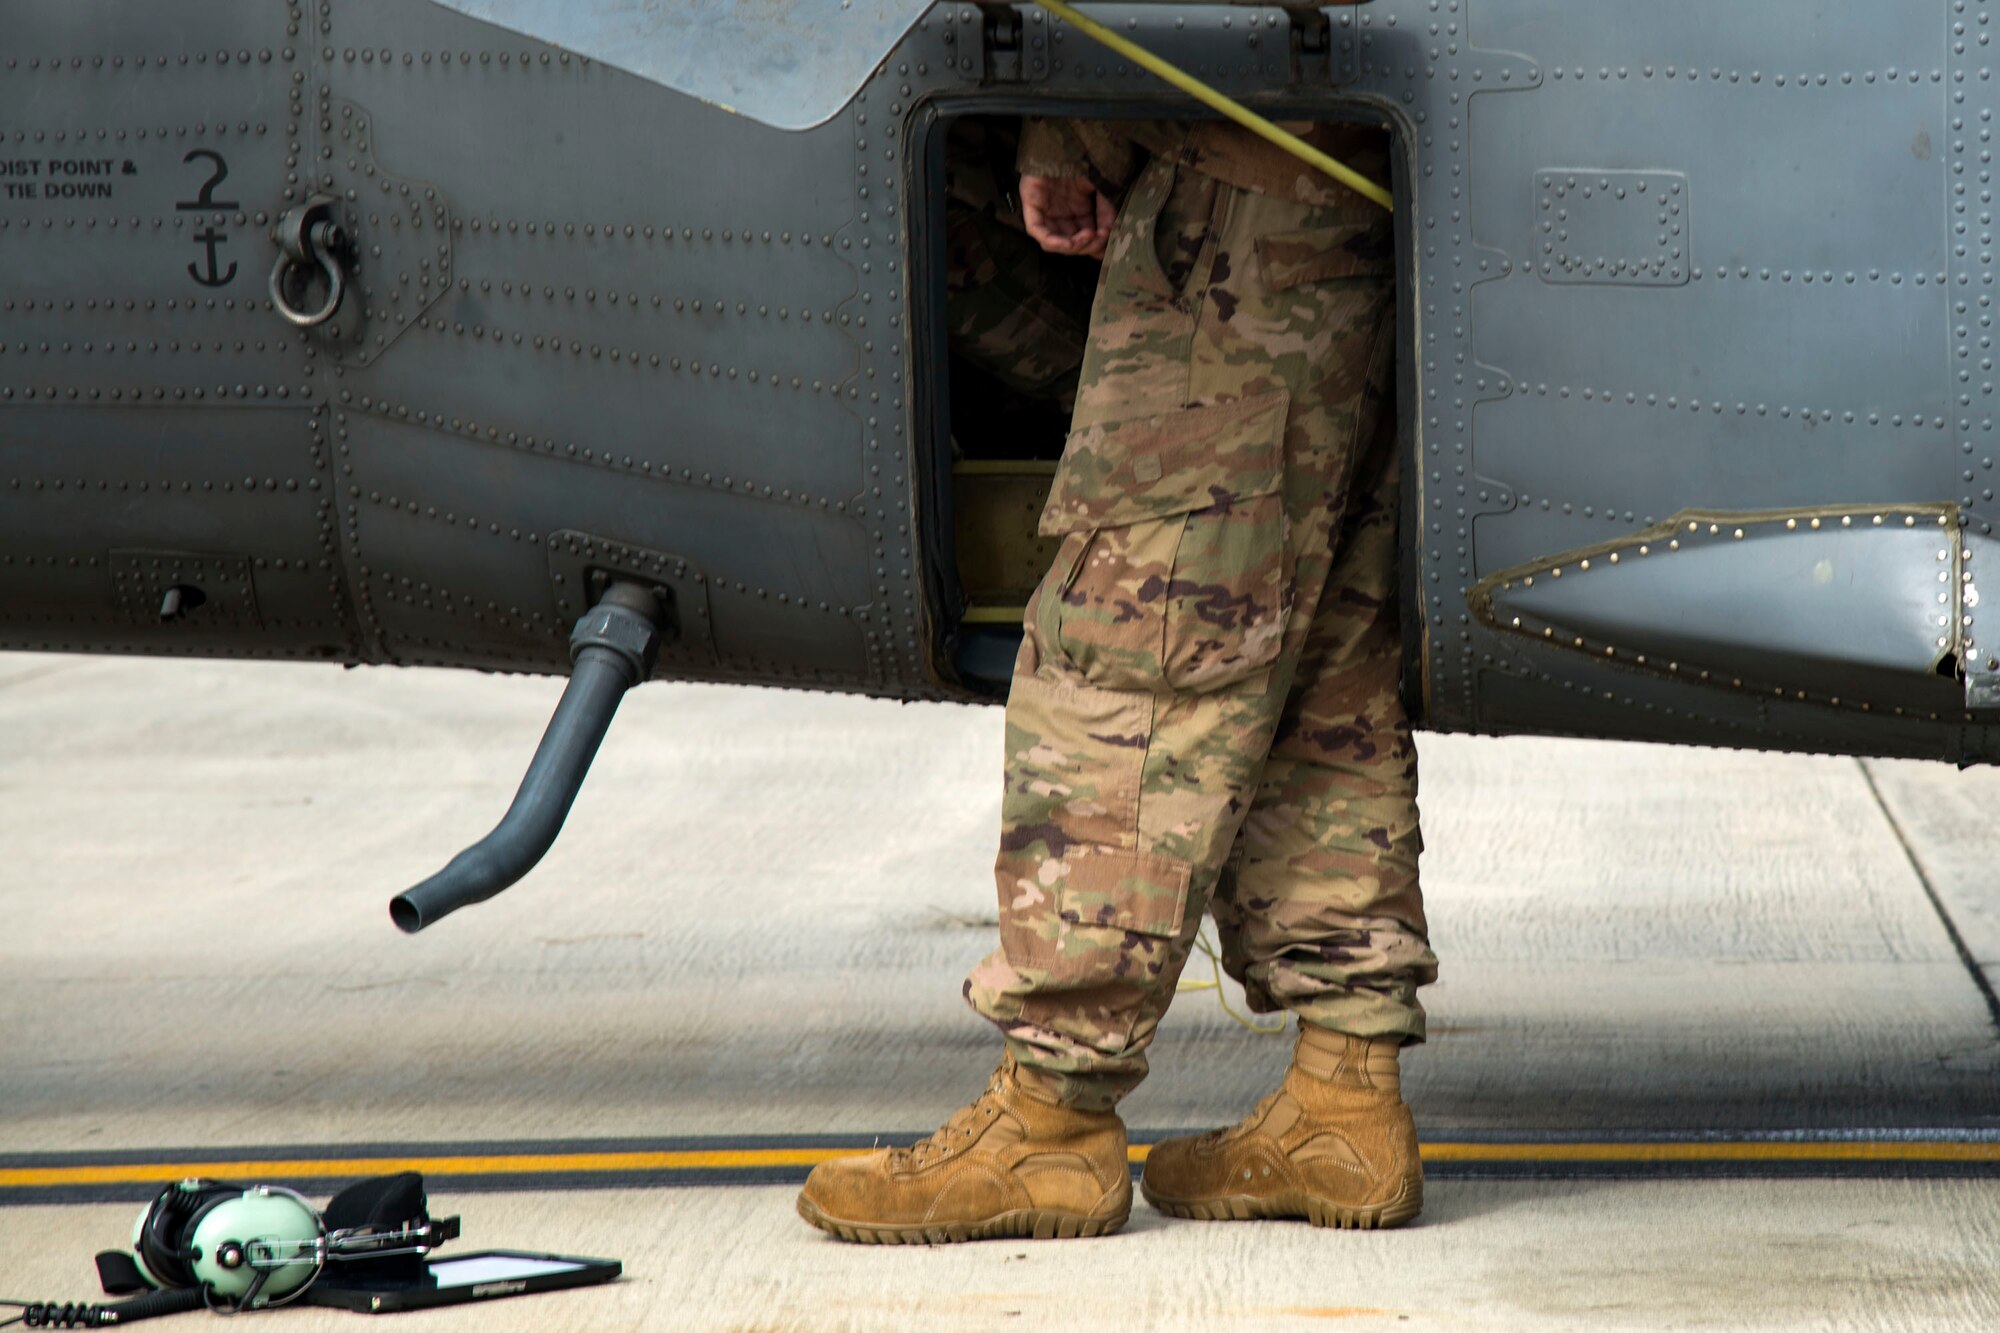 Senior Airman Kaiden Stanley, 41st Helicopter Maintenance Unit (HMU) specialist, reviews component locations in an HH-60G Pave Hawk, Jan. 9, 2018, at Moody Air Force Base, Ga. The 41st HMU keeps Pave Hawks operationally ready by performing inspections and repairs on various components of the helicopter. Those efforts are critical in facilitating the mission of the 41st Rescue Squadron at Moody. (U.S. Air Force photo by Airman 1st Class Erick Requadt)